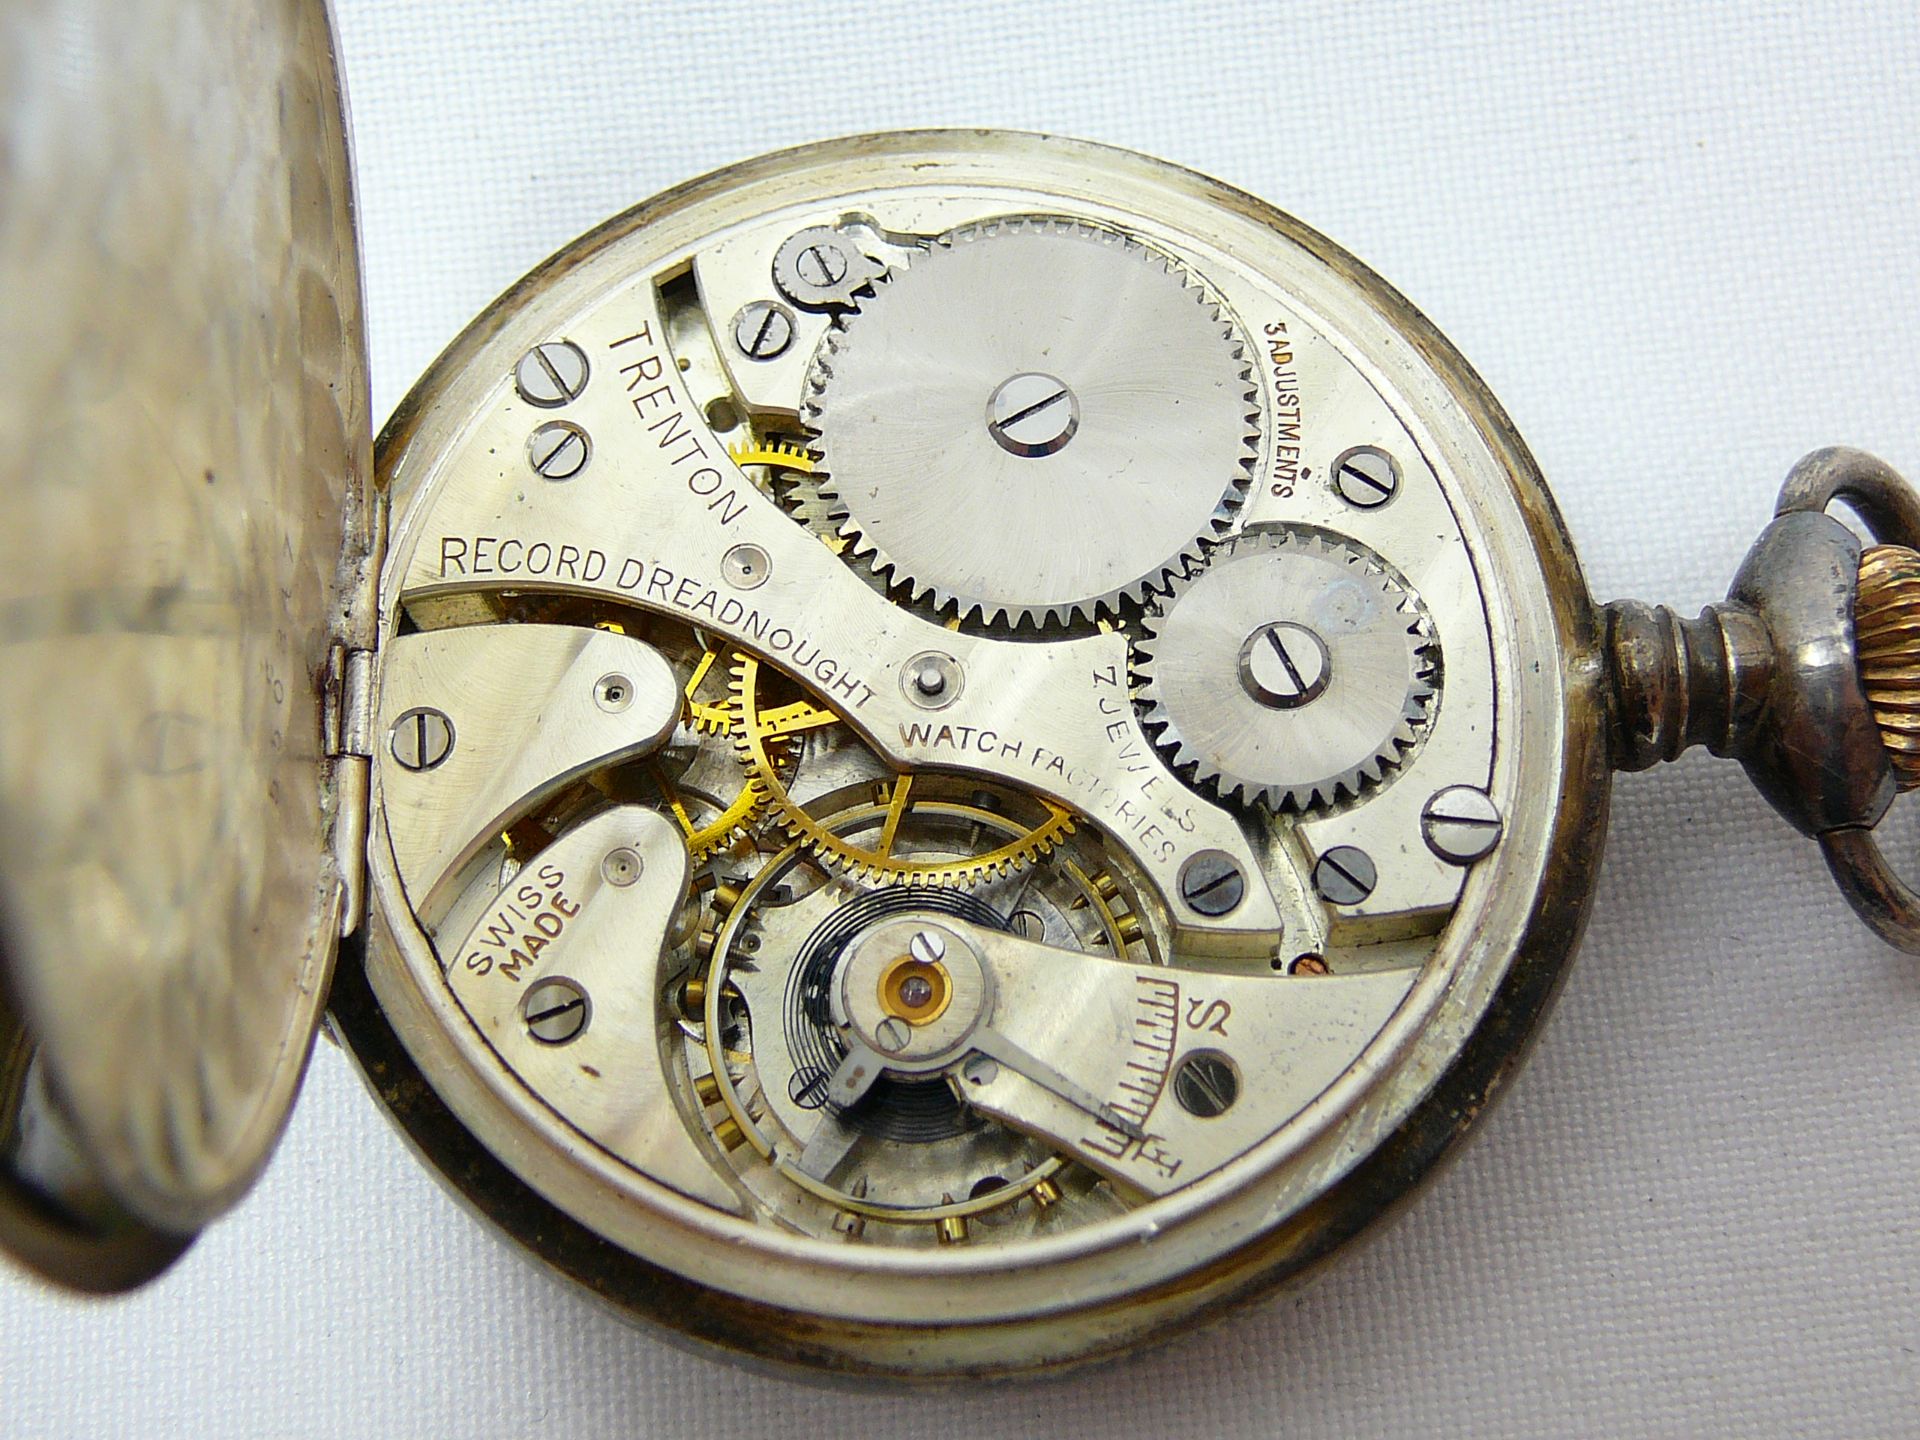 Gents Antique Silver Pocket Watch by Trenton - Image 5 of 5